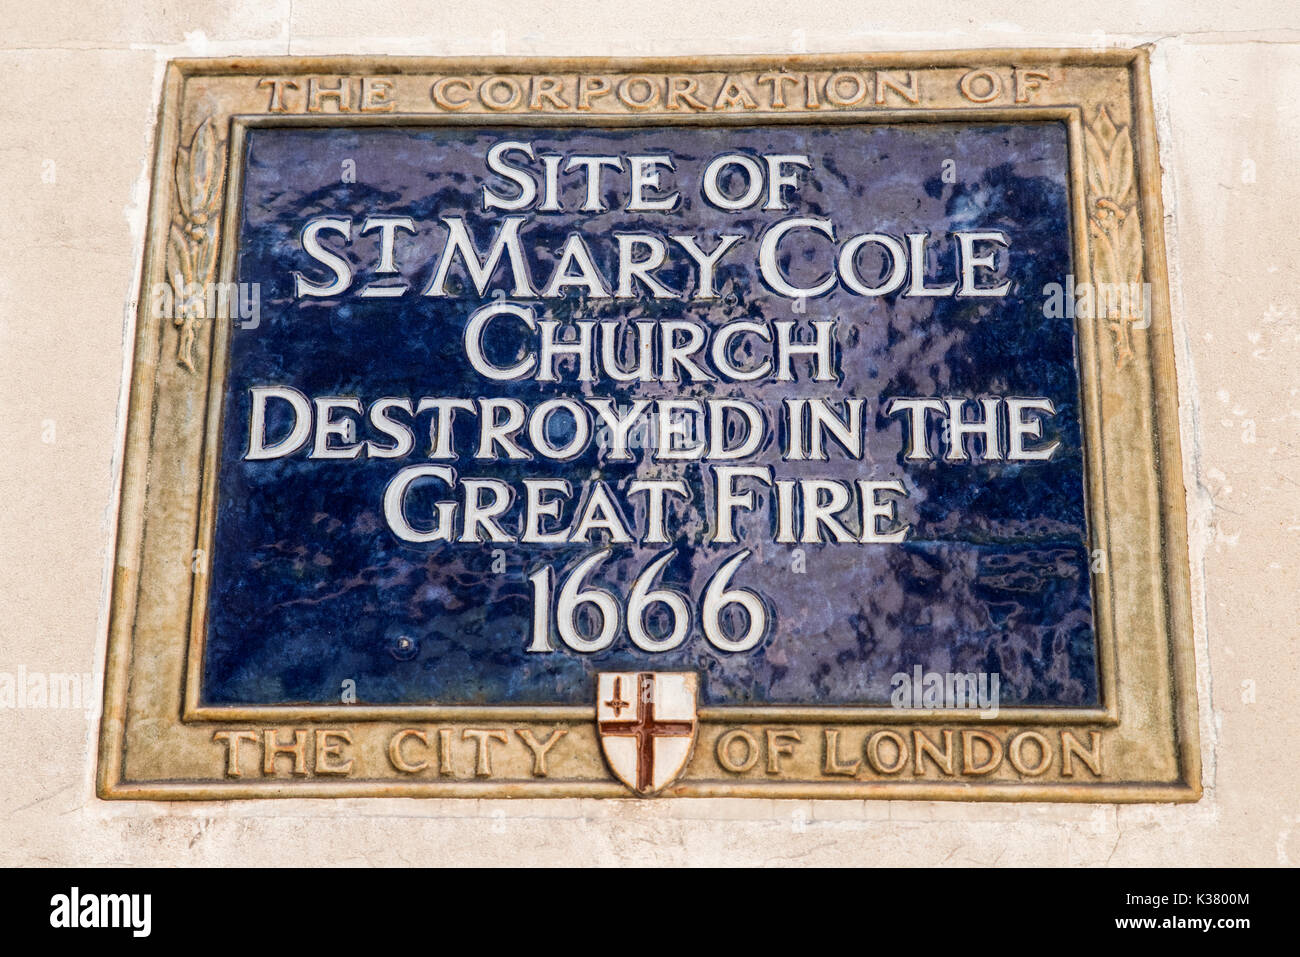 LONDON, UK - AUGUST 25TH 2017: A blue plaque marking the location where St. Mary Cole Church once stood in London, on 25th August 2017. Stock Photo